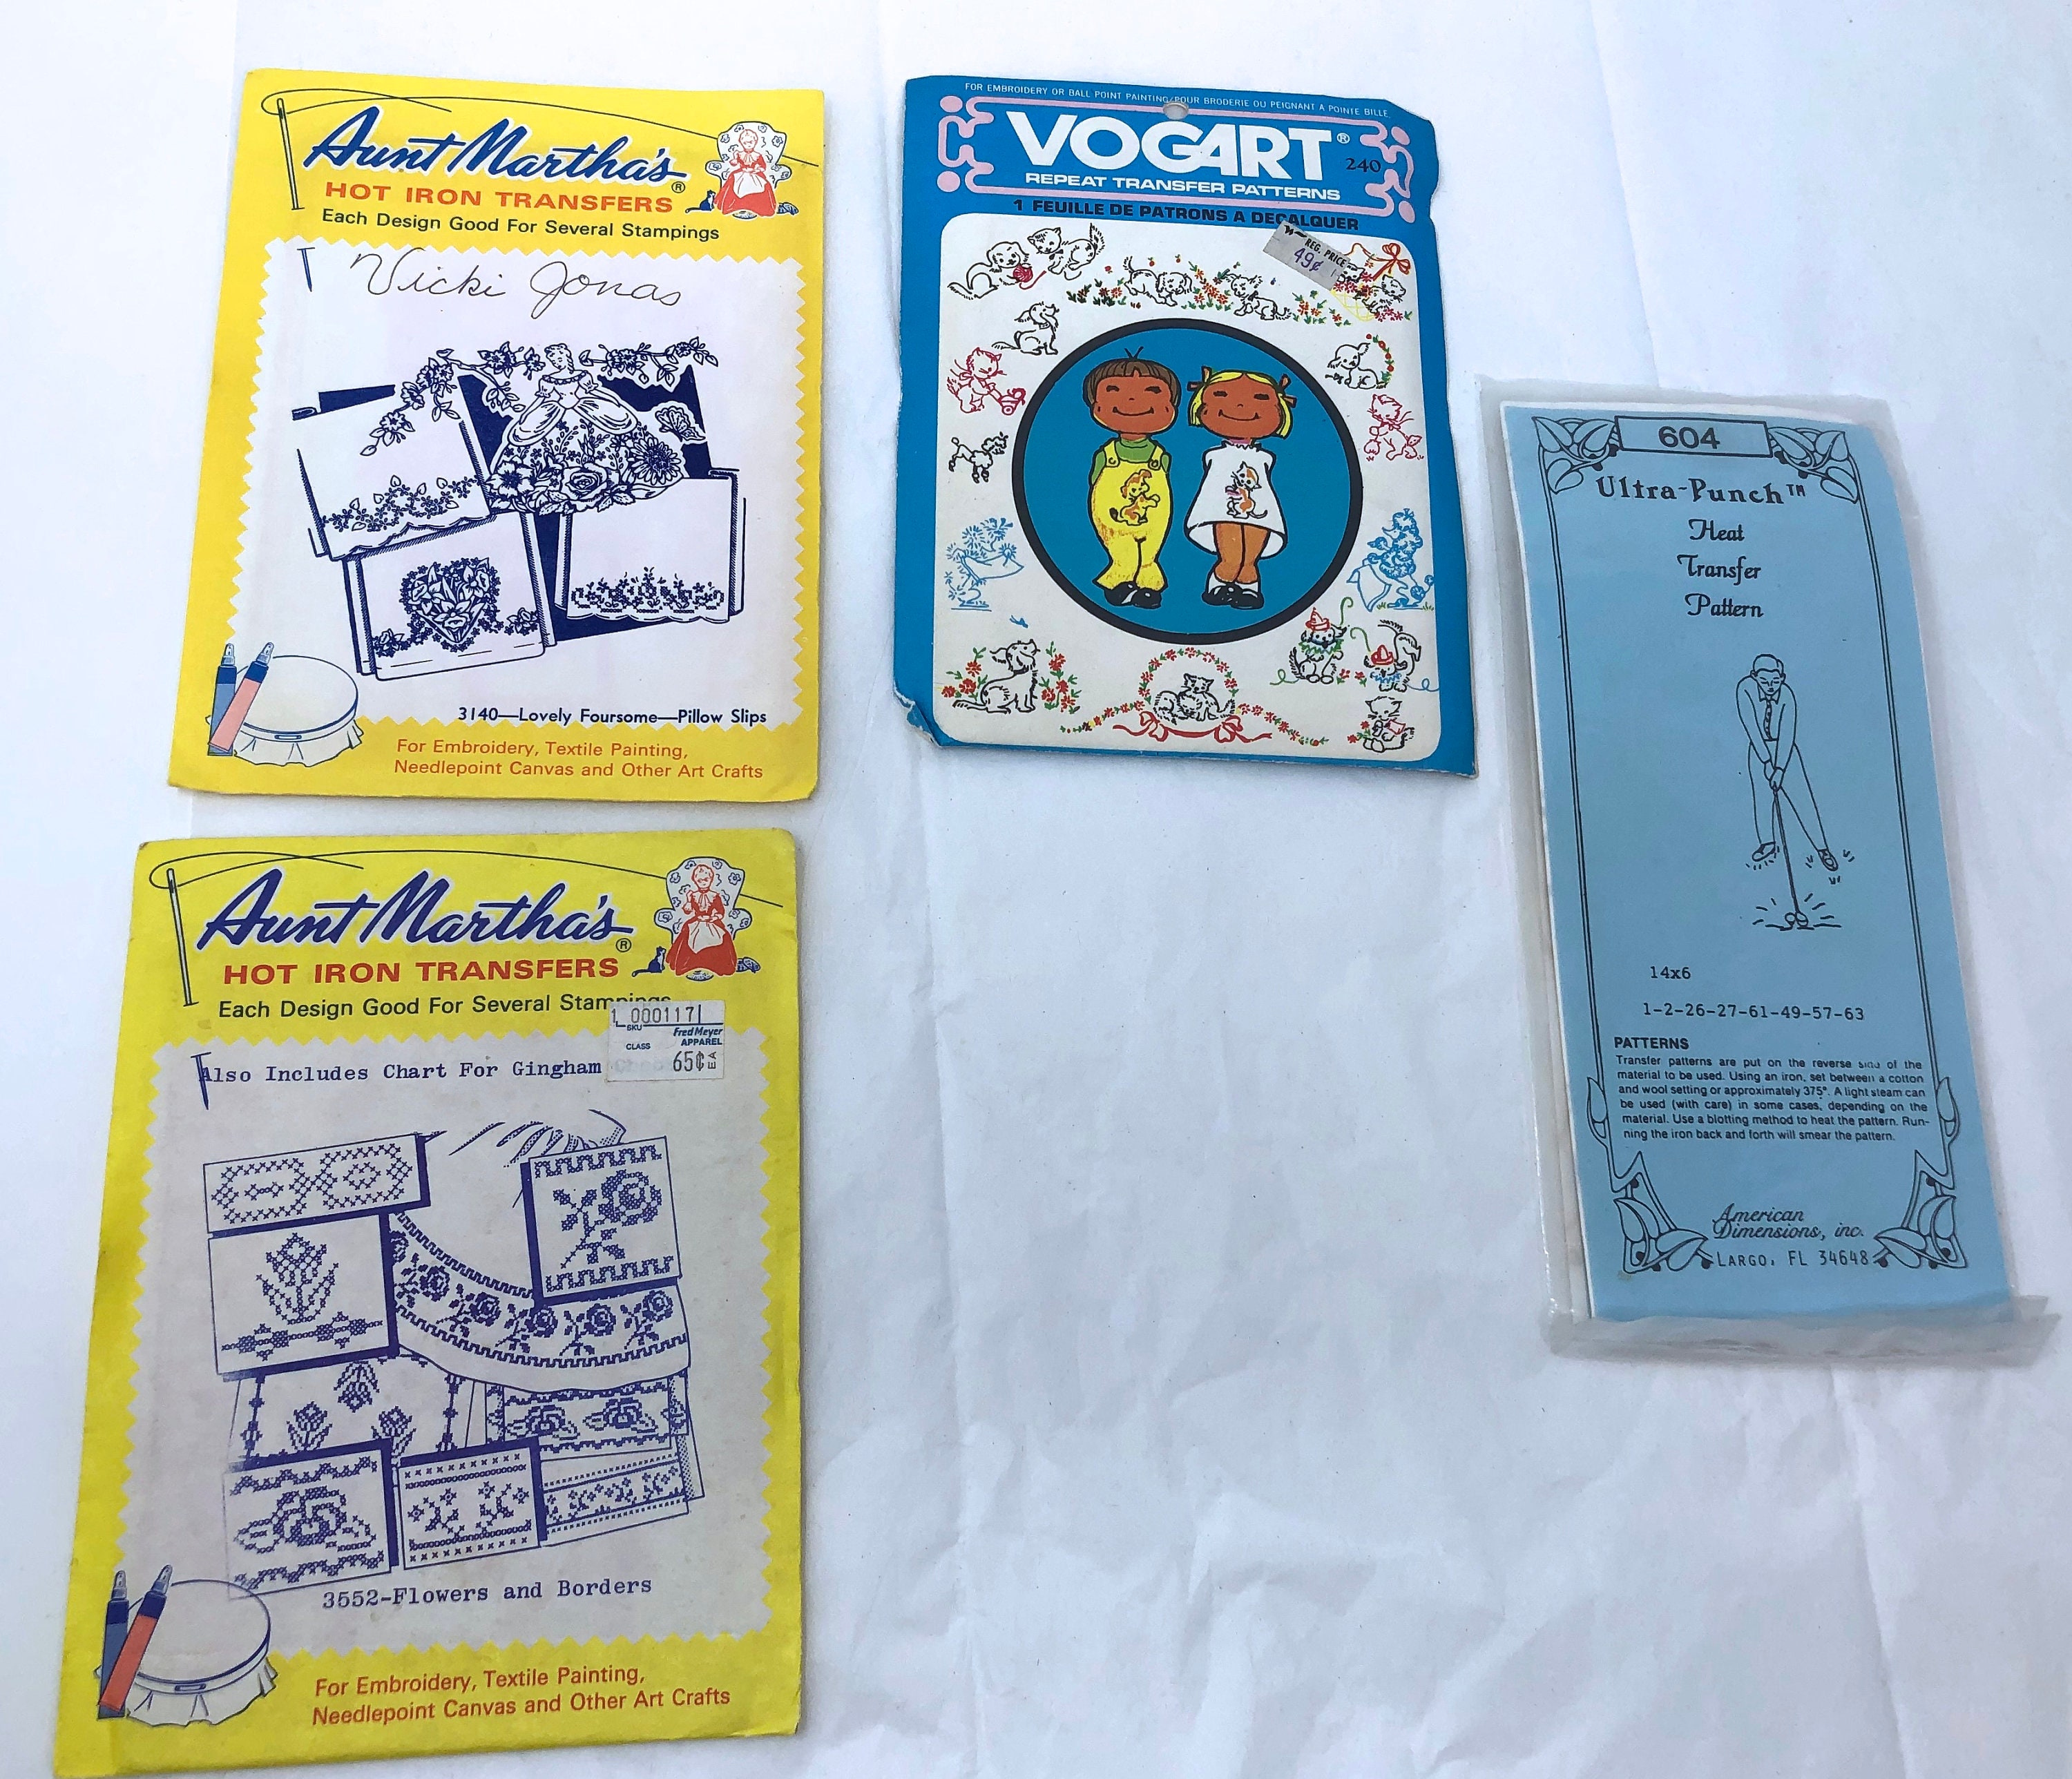 vintage embroidery transfers and charts – the vintage pattern market